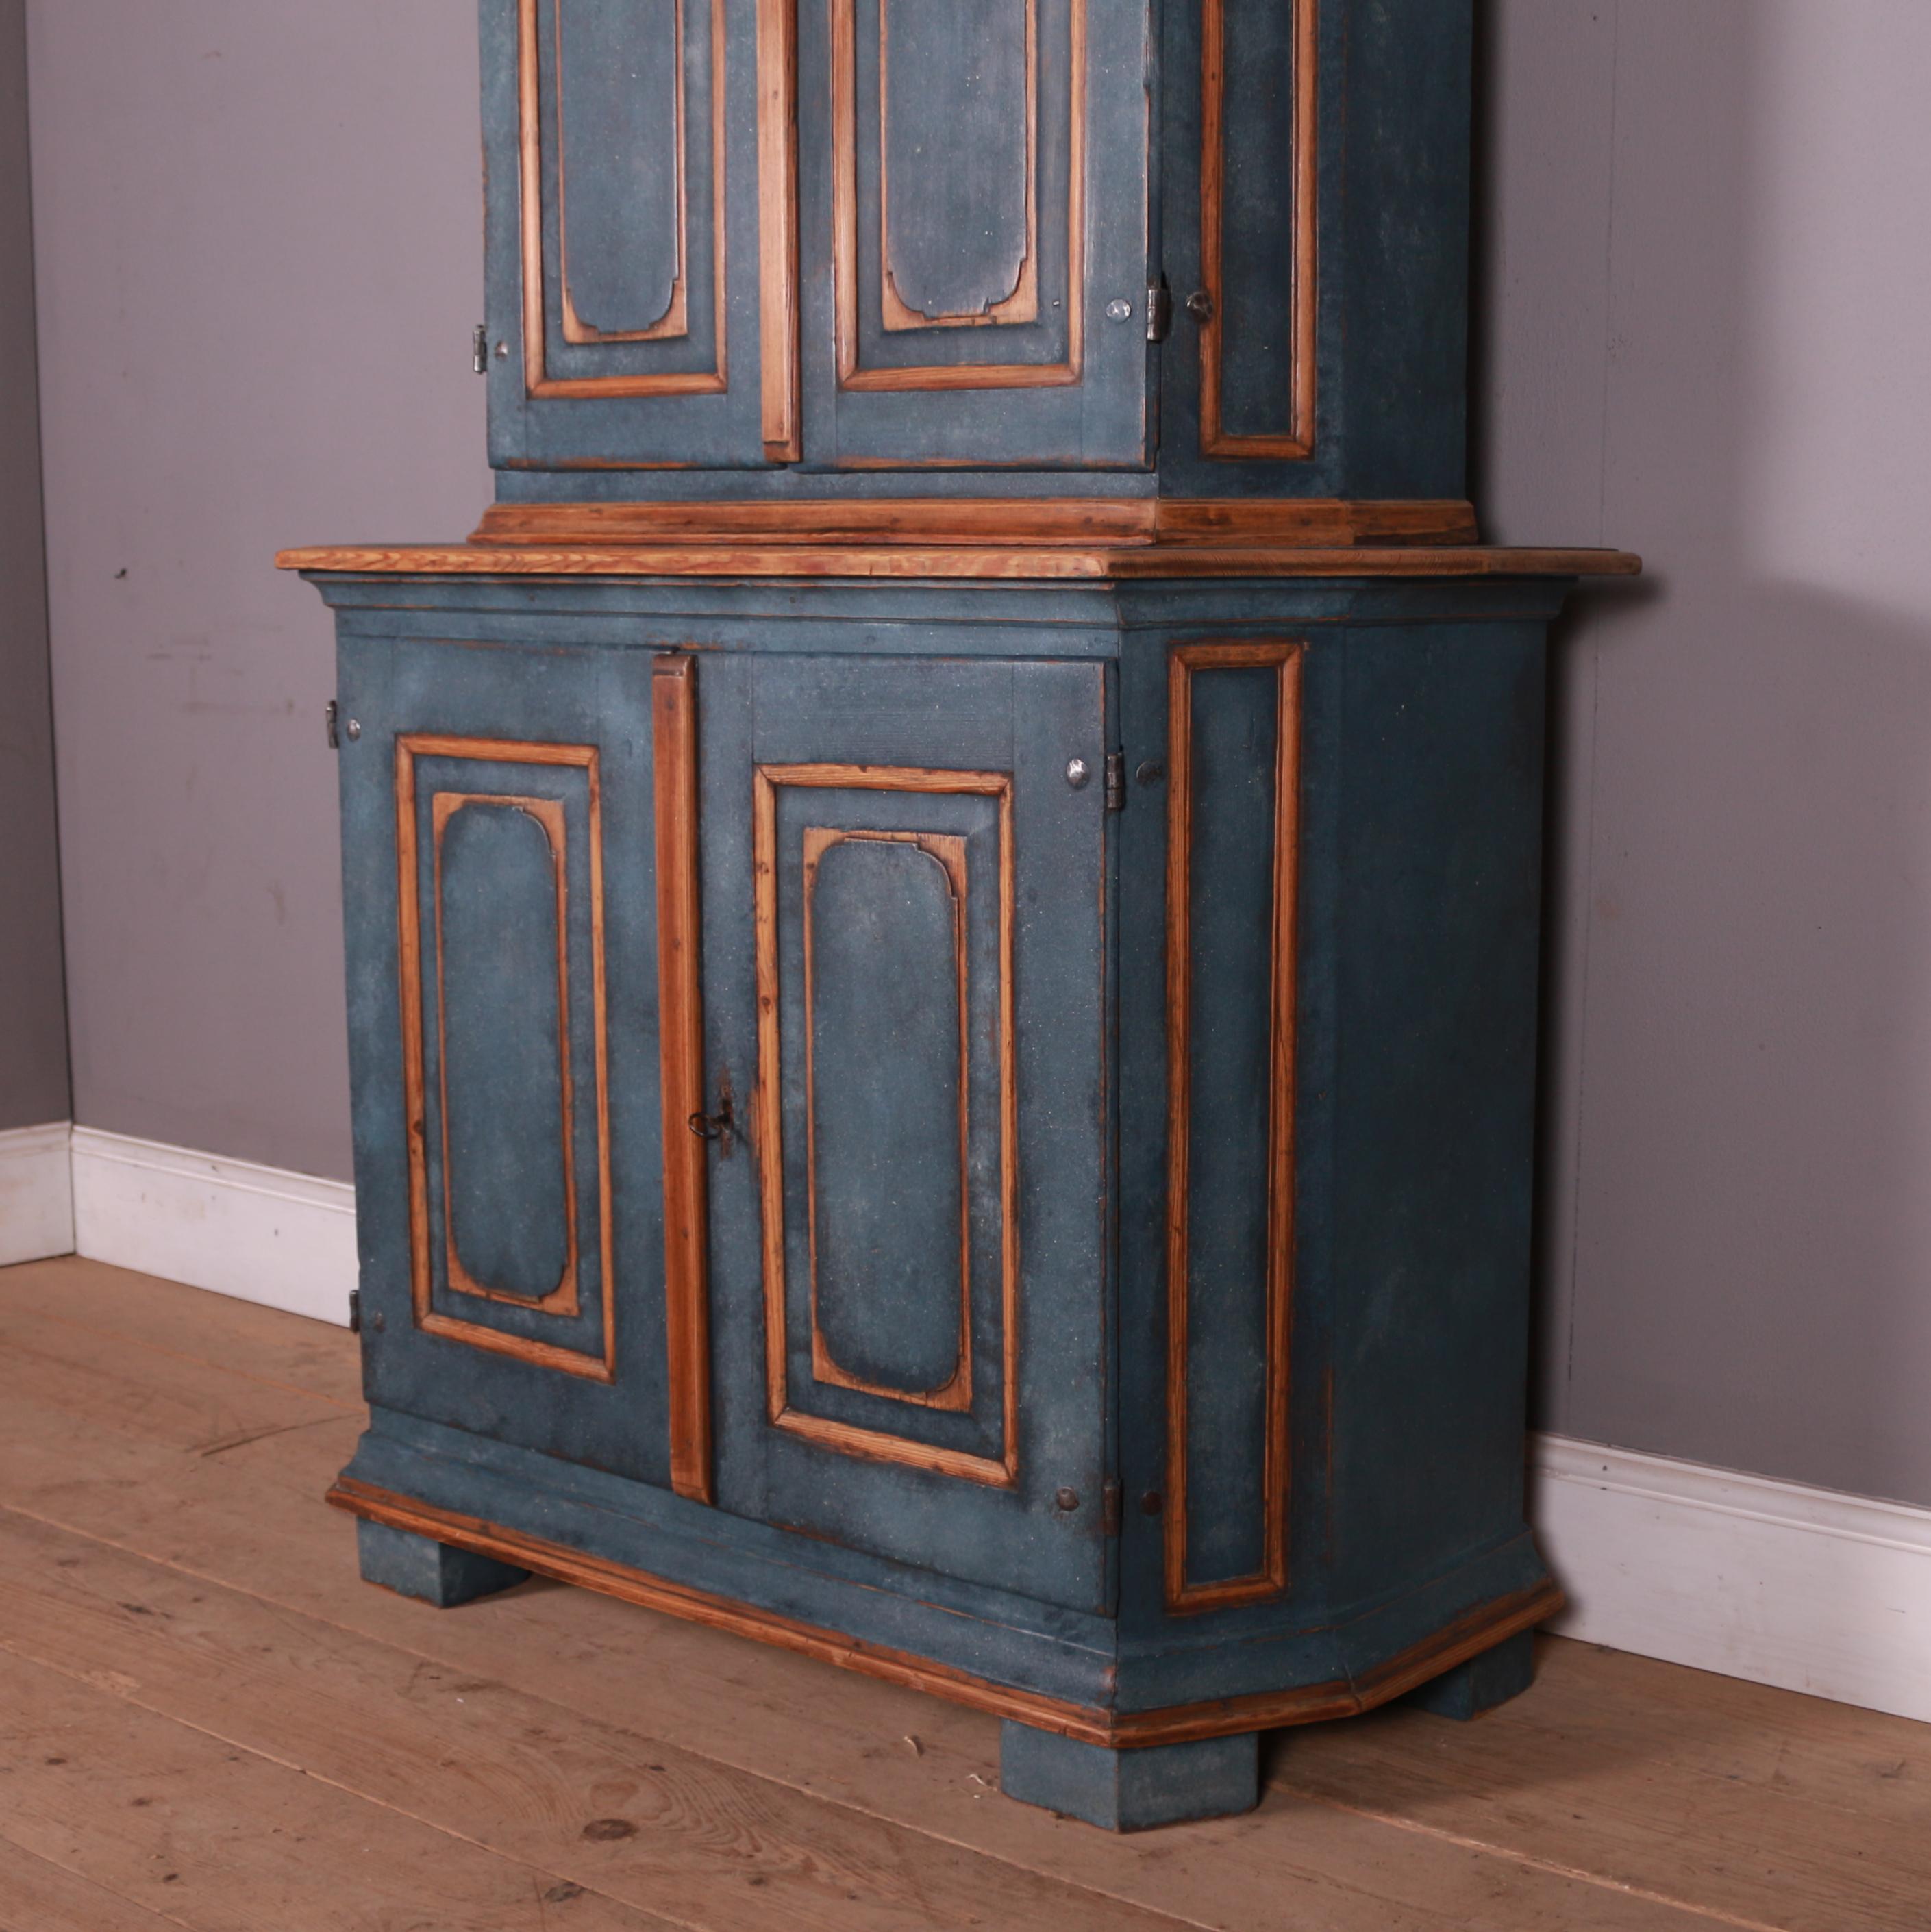 Lovely early 19th C Swedish painted pine cupboard with lots of storage. This would of originally been used in a kitchen.